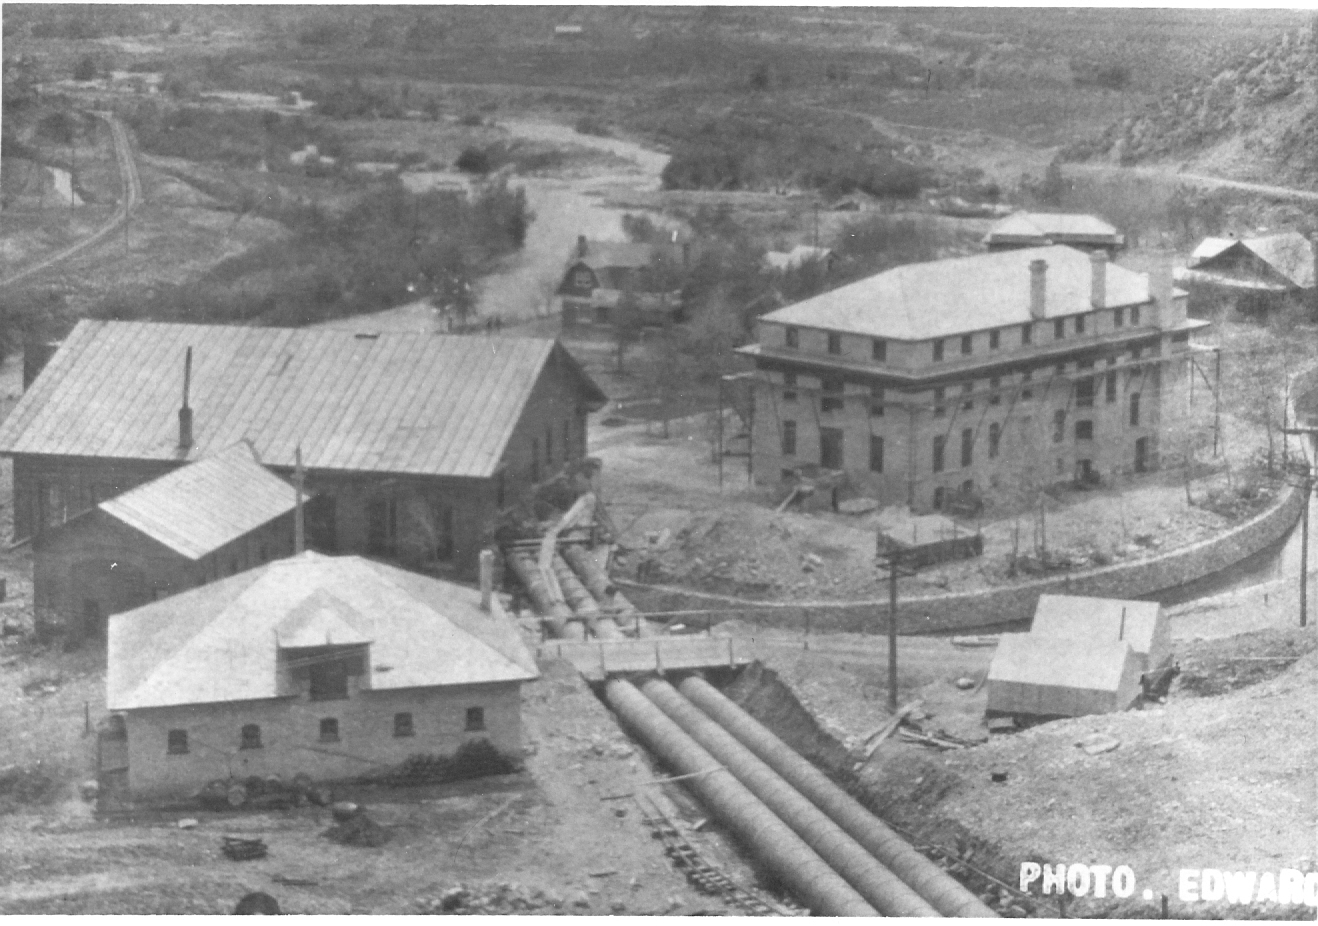 Black and white photo of penstock and old power house